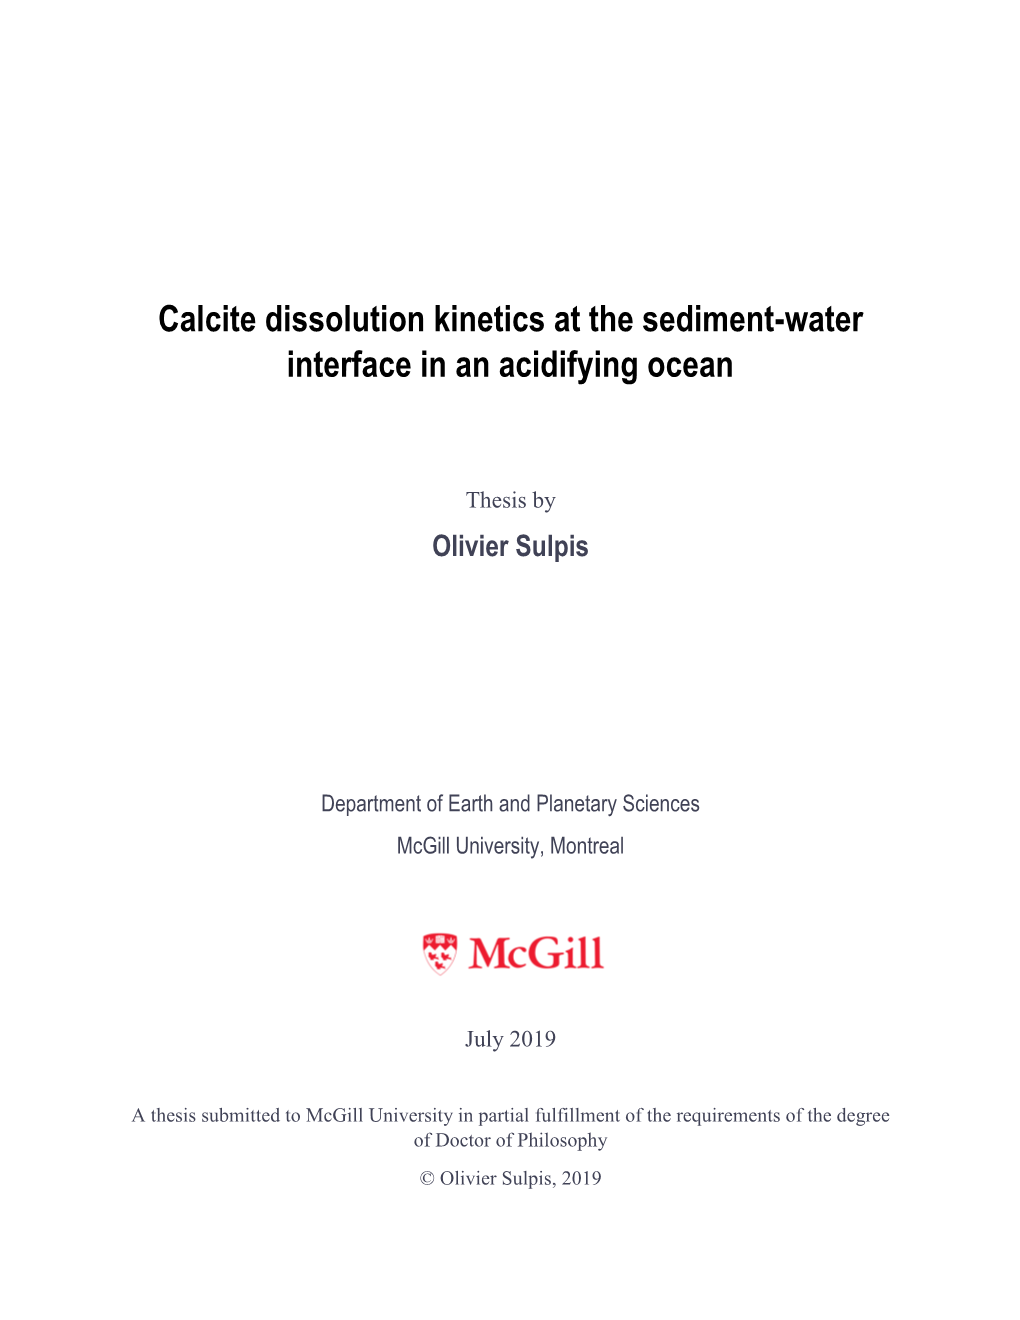 Calcite Dissolution Kinetics at the Sediment-Water Interface in an Acidifying Ocean